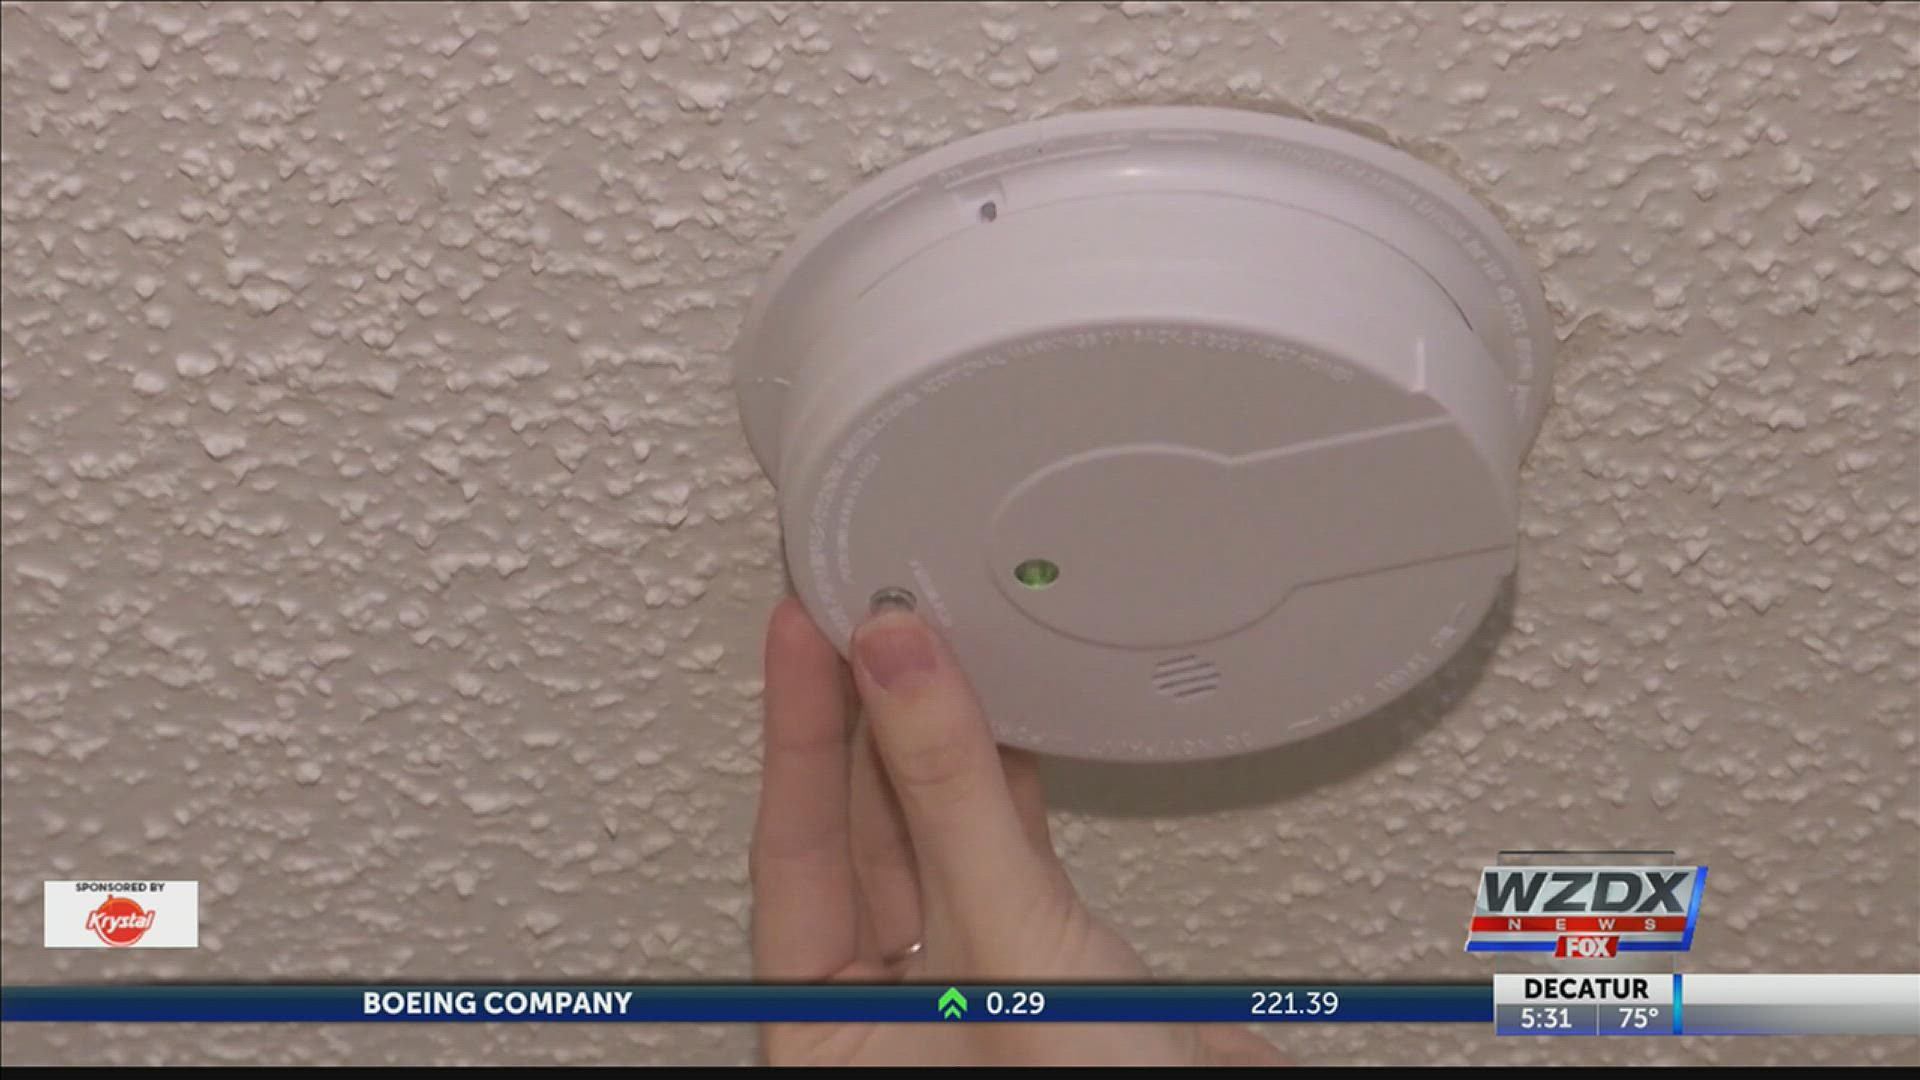 Working smoke alarms and carbon monoxide detectors could save your life in a house fire. But many people don't have them or check them regularly.